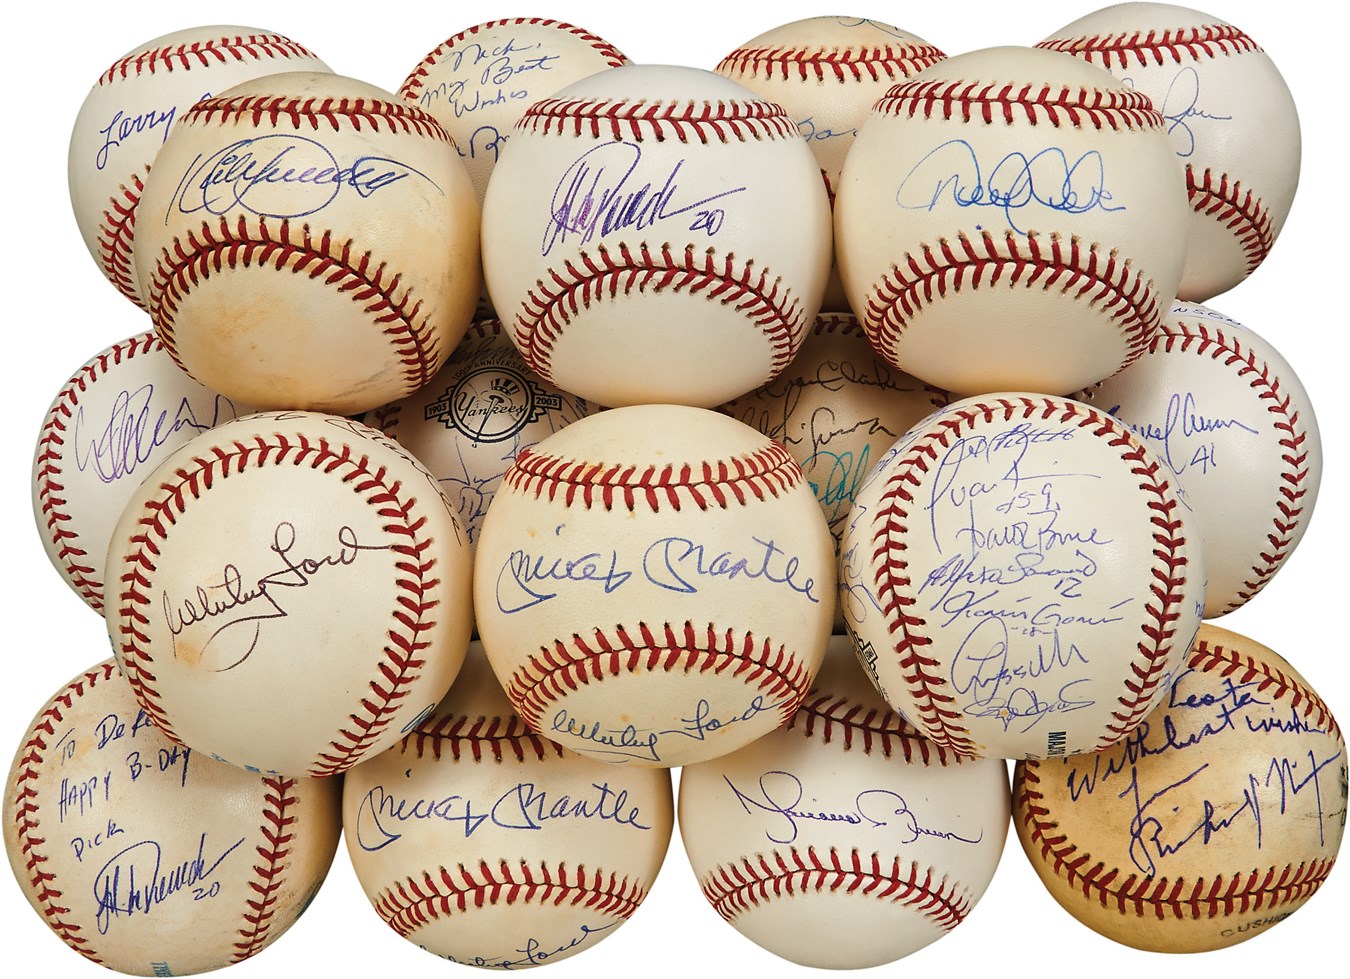 Fantastic Signed Baseball Collection from ex-NY Yankee (425+)